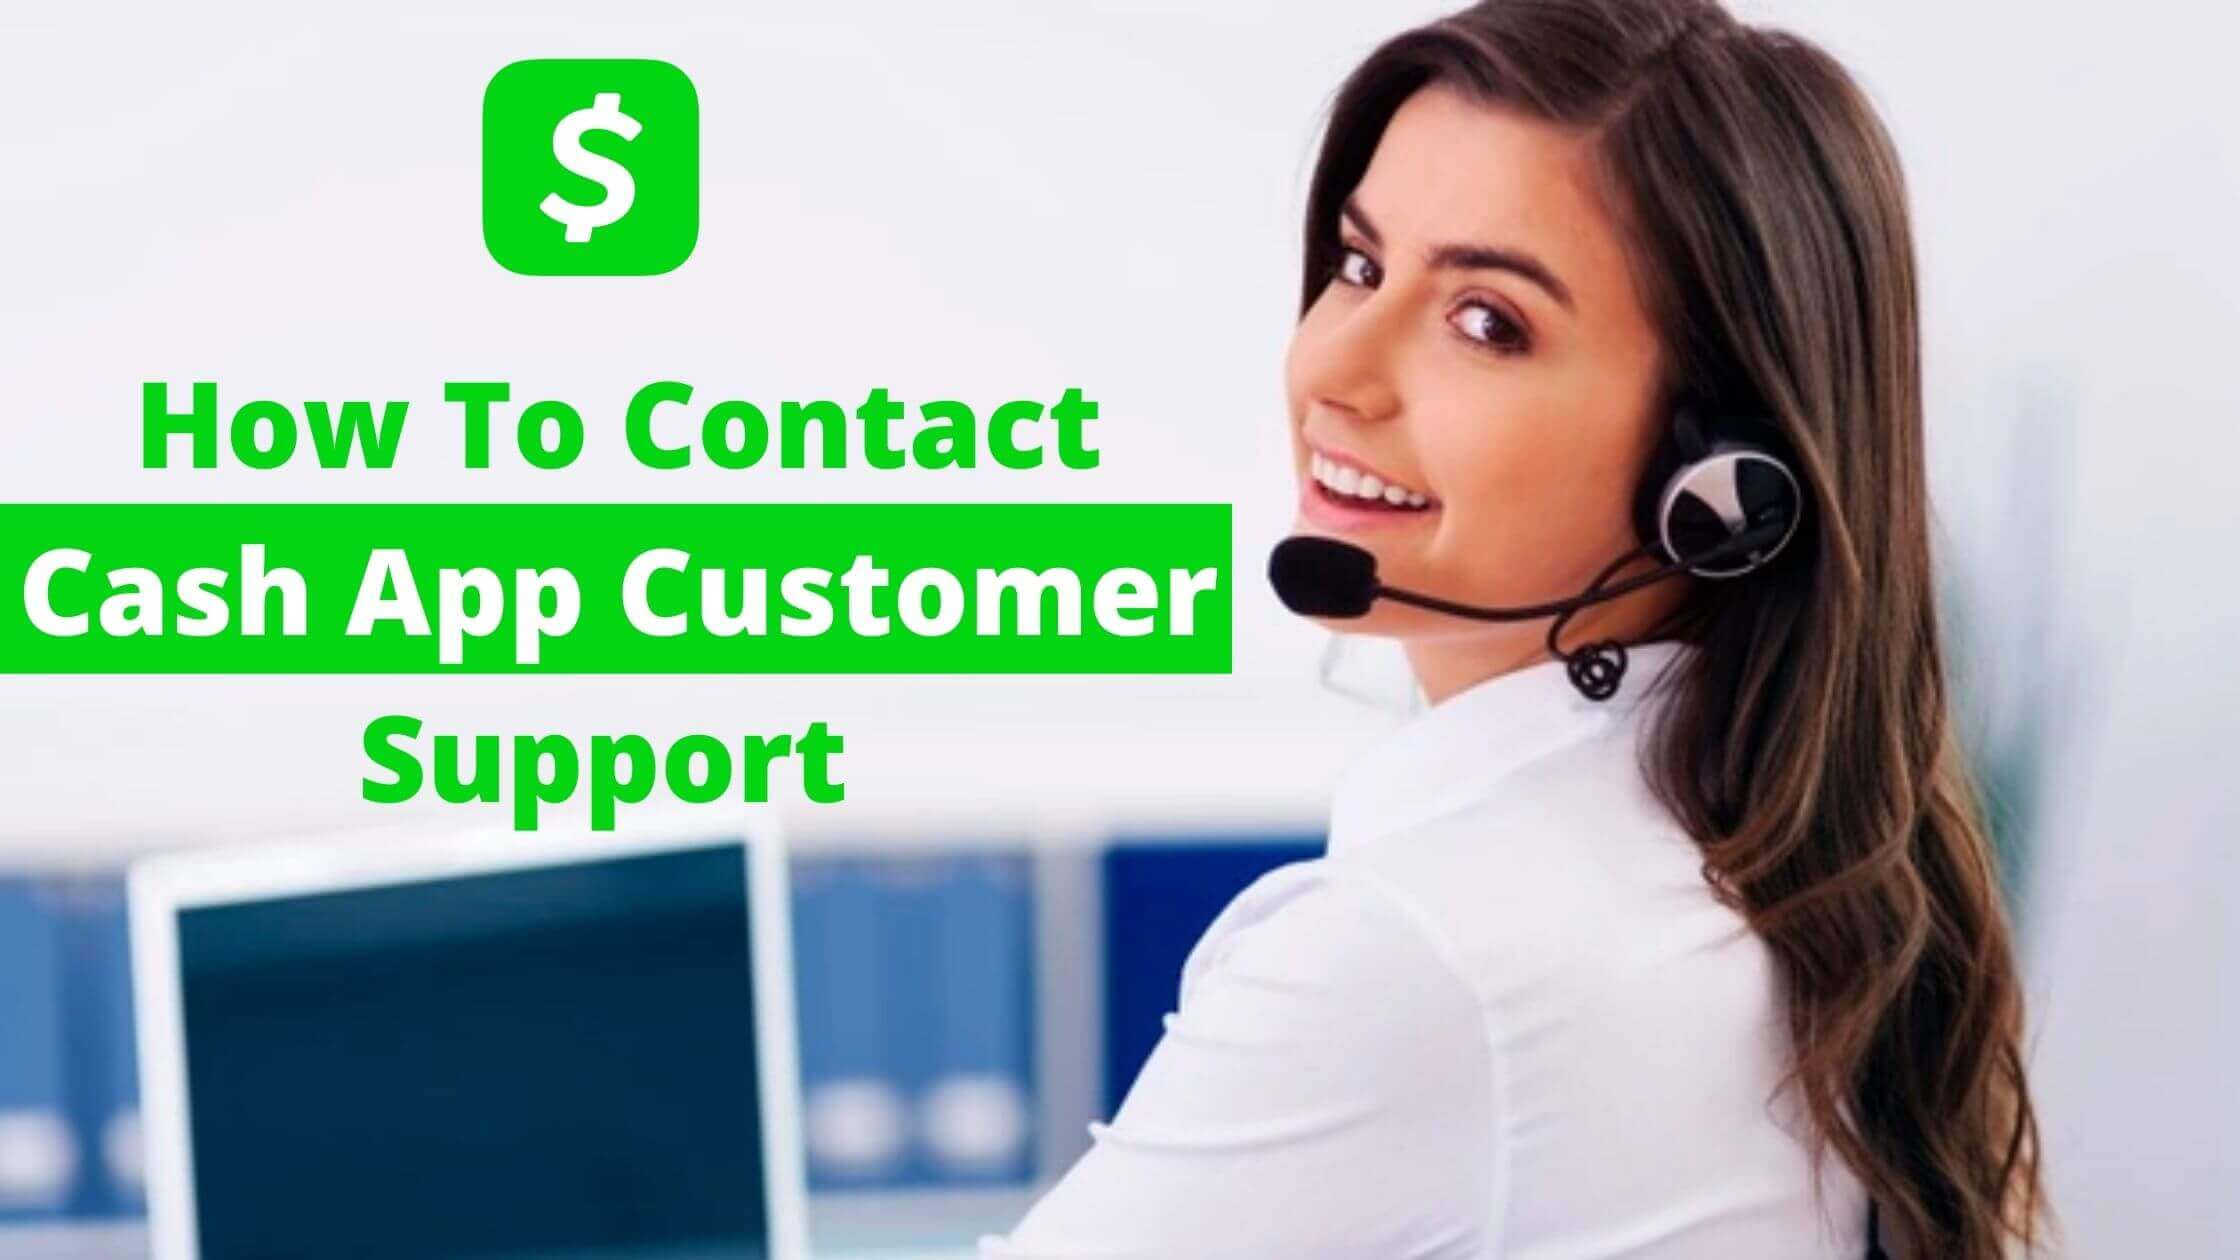 How To Contact Cash App Customer Support